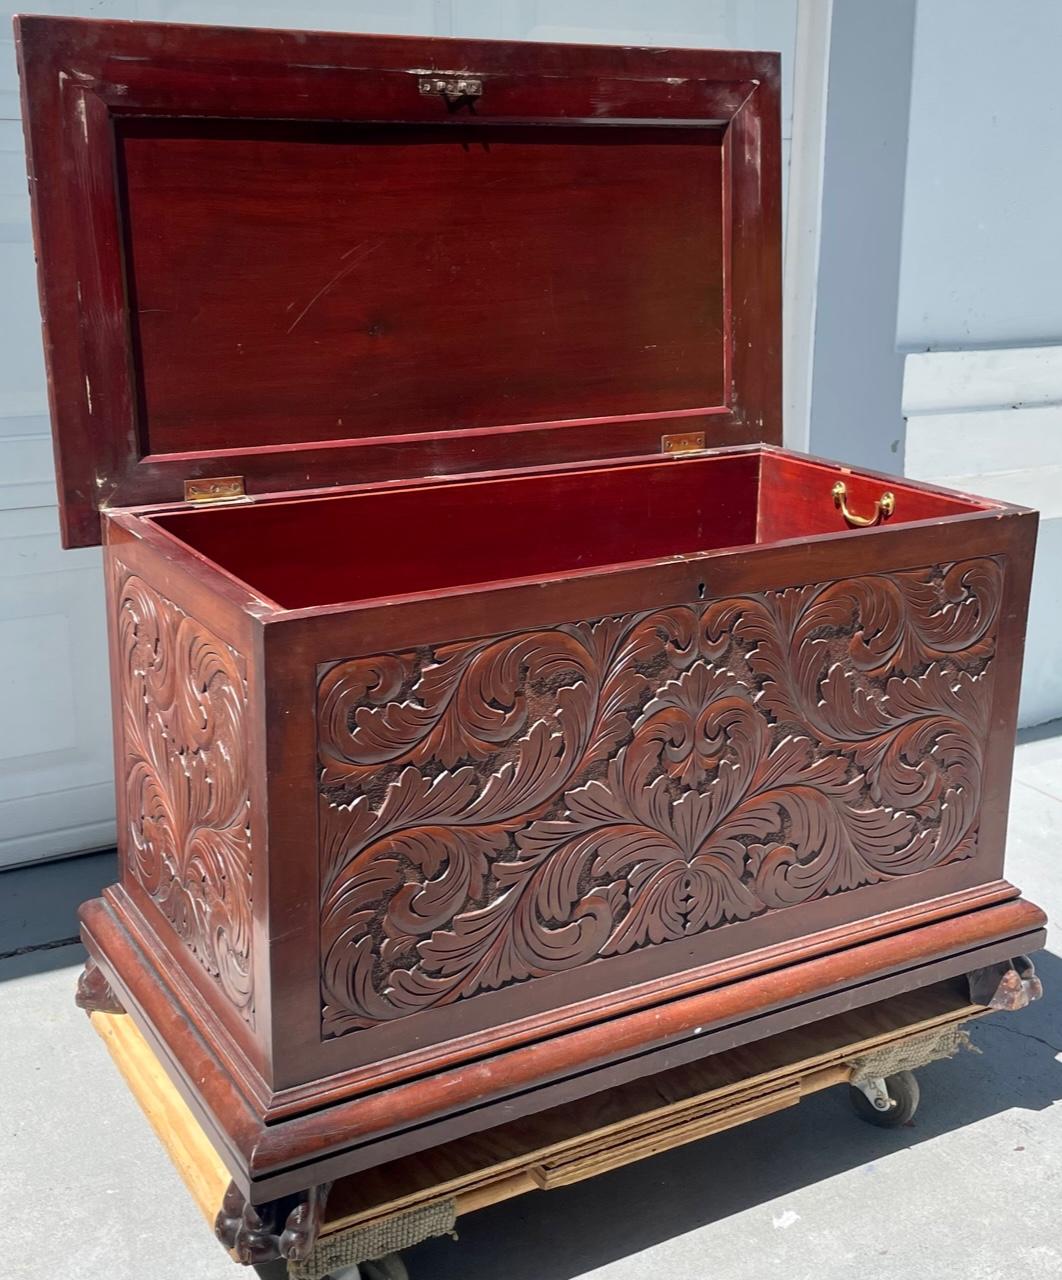 19th Century baroque revival carved wooden blanket chest.

Elaborately carved wood chest in superb quality. Floral motif in relief on all sides. The top is adorned with the same floral elements. Artfully carved lion paws on all four corners. The